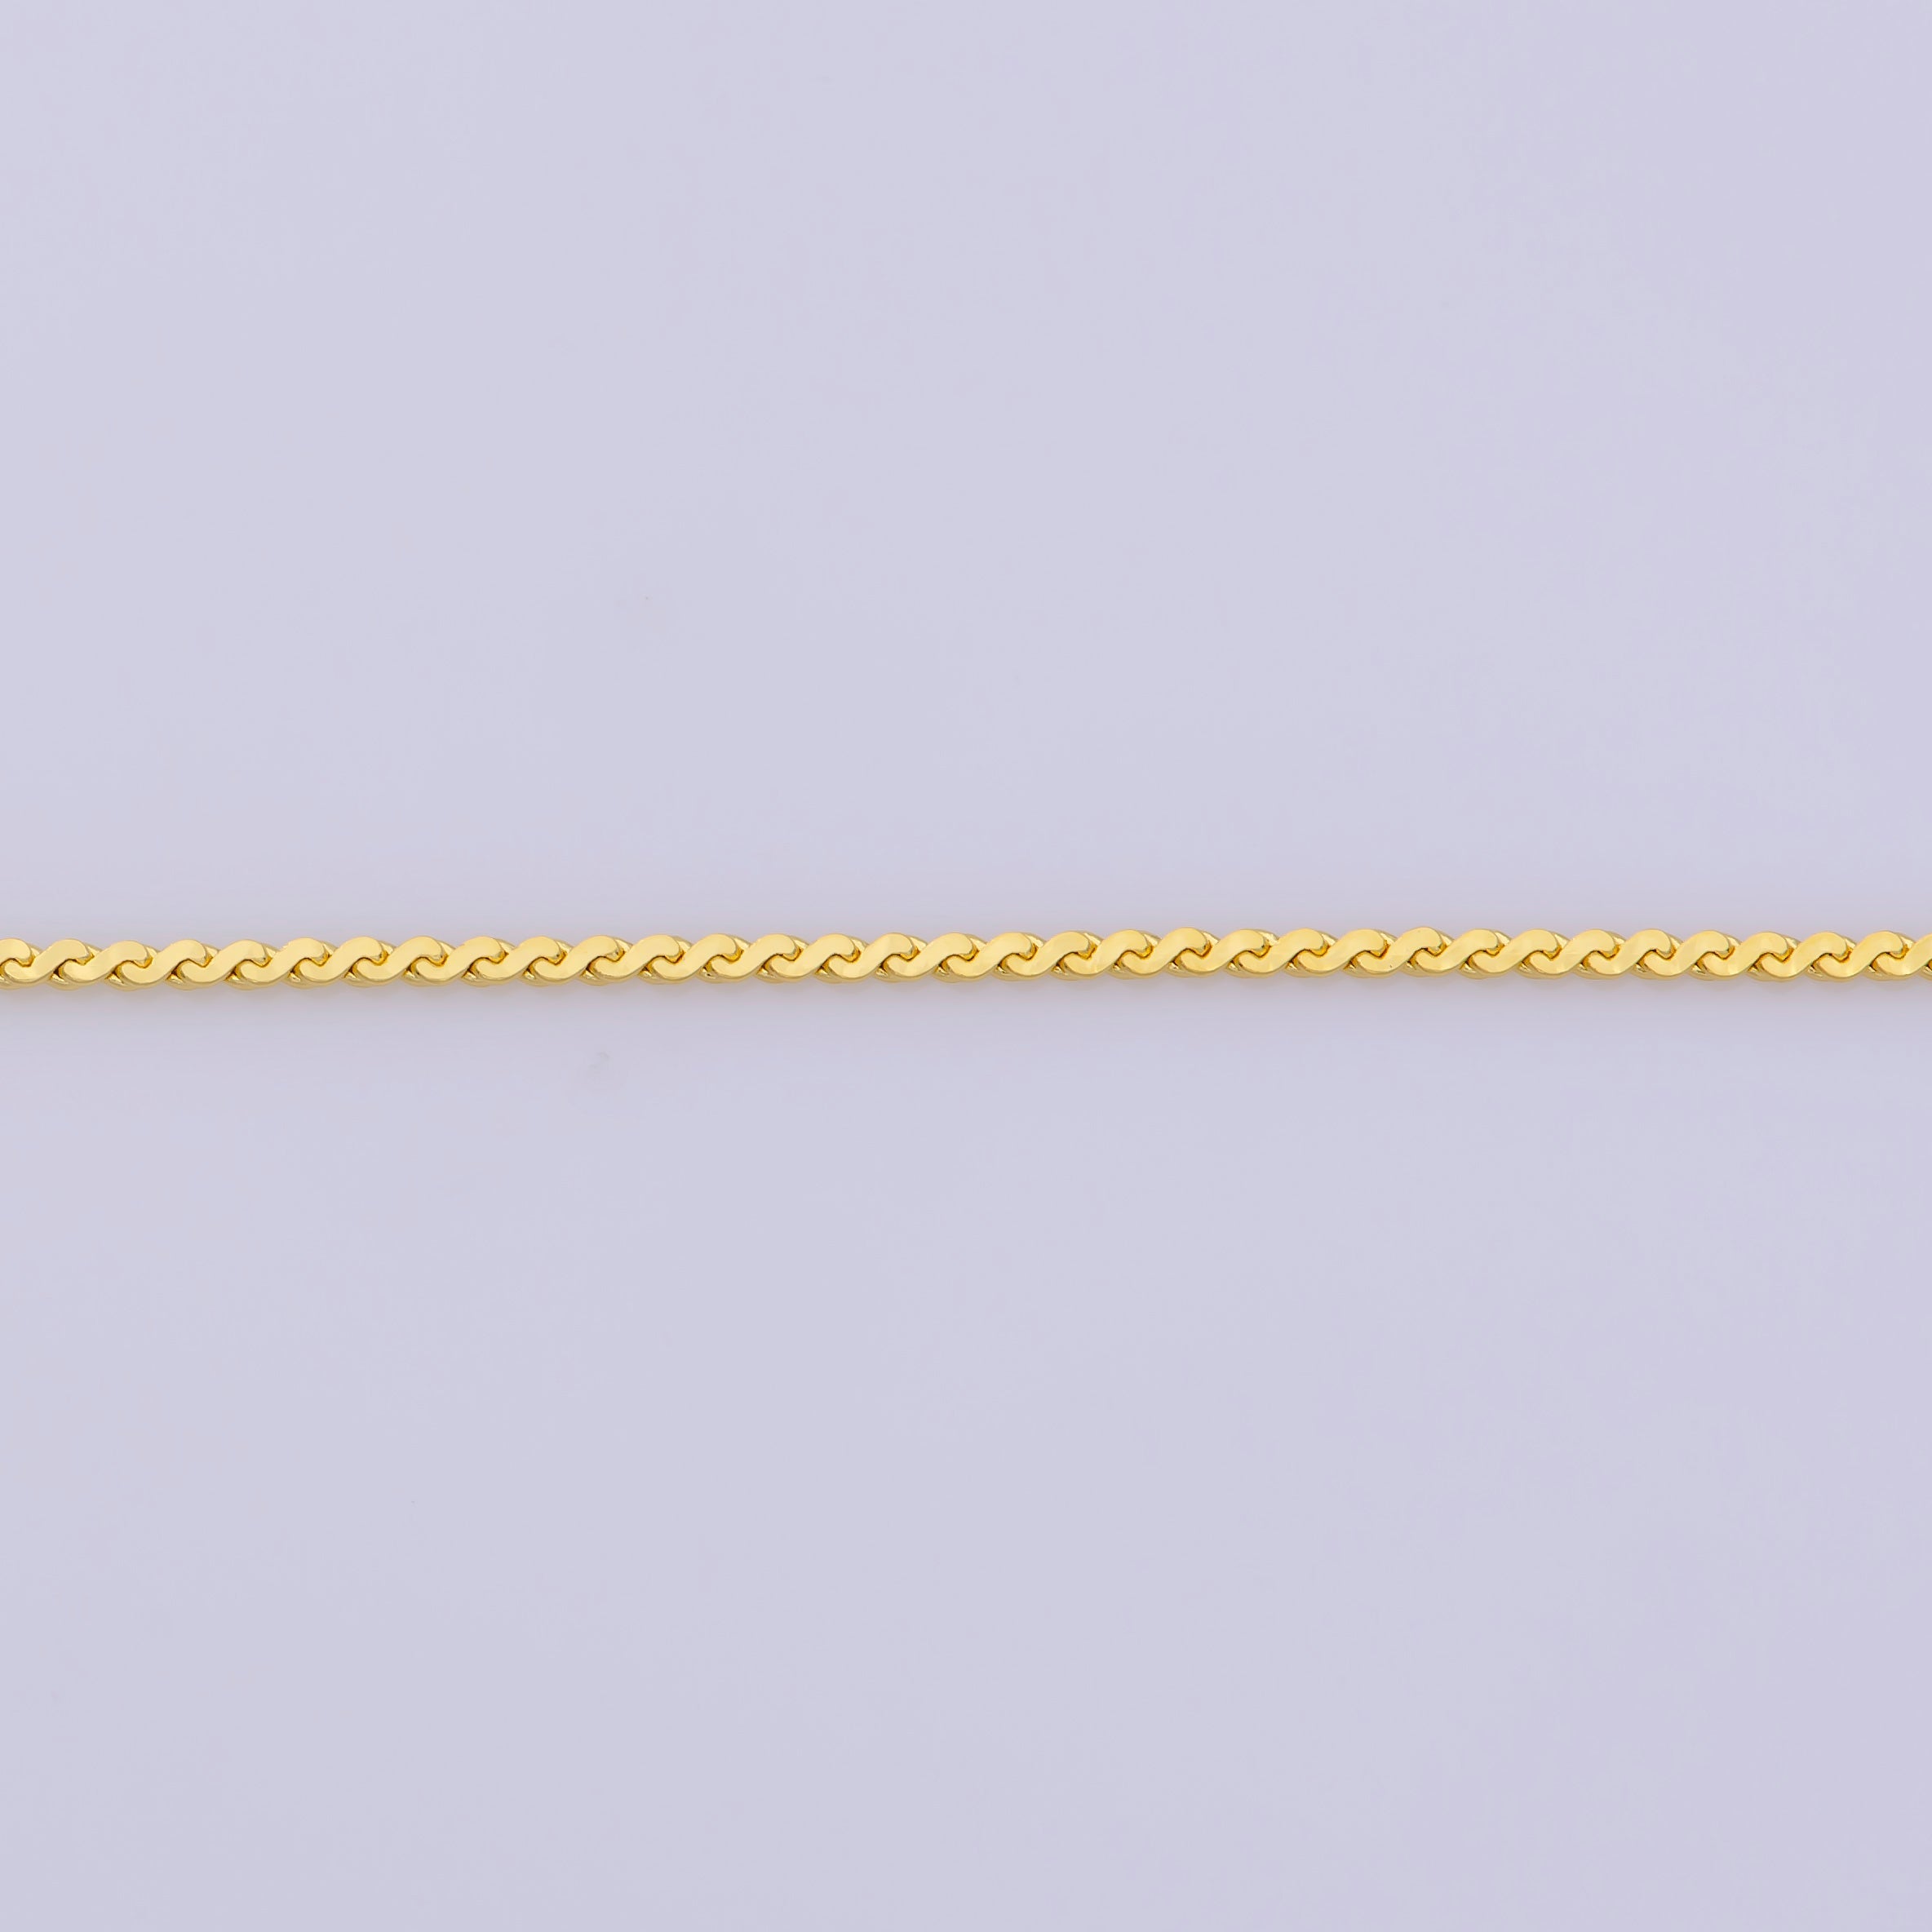 Clearance Pricing BLOWOUT Dainty 24K Gold-Plated 1.5mm Bead Chain